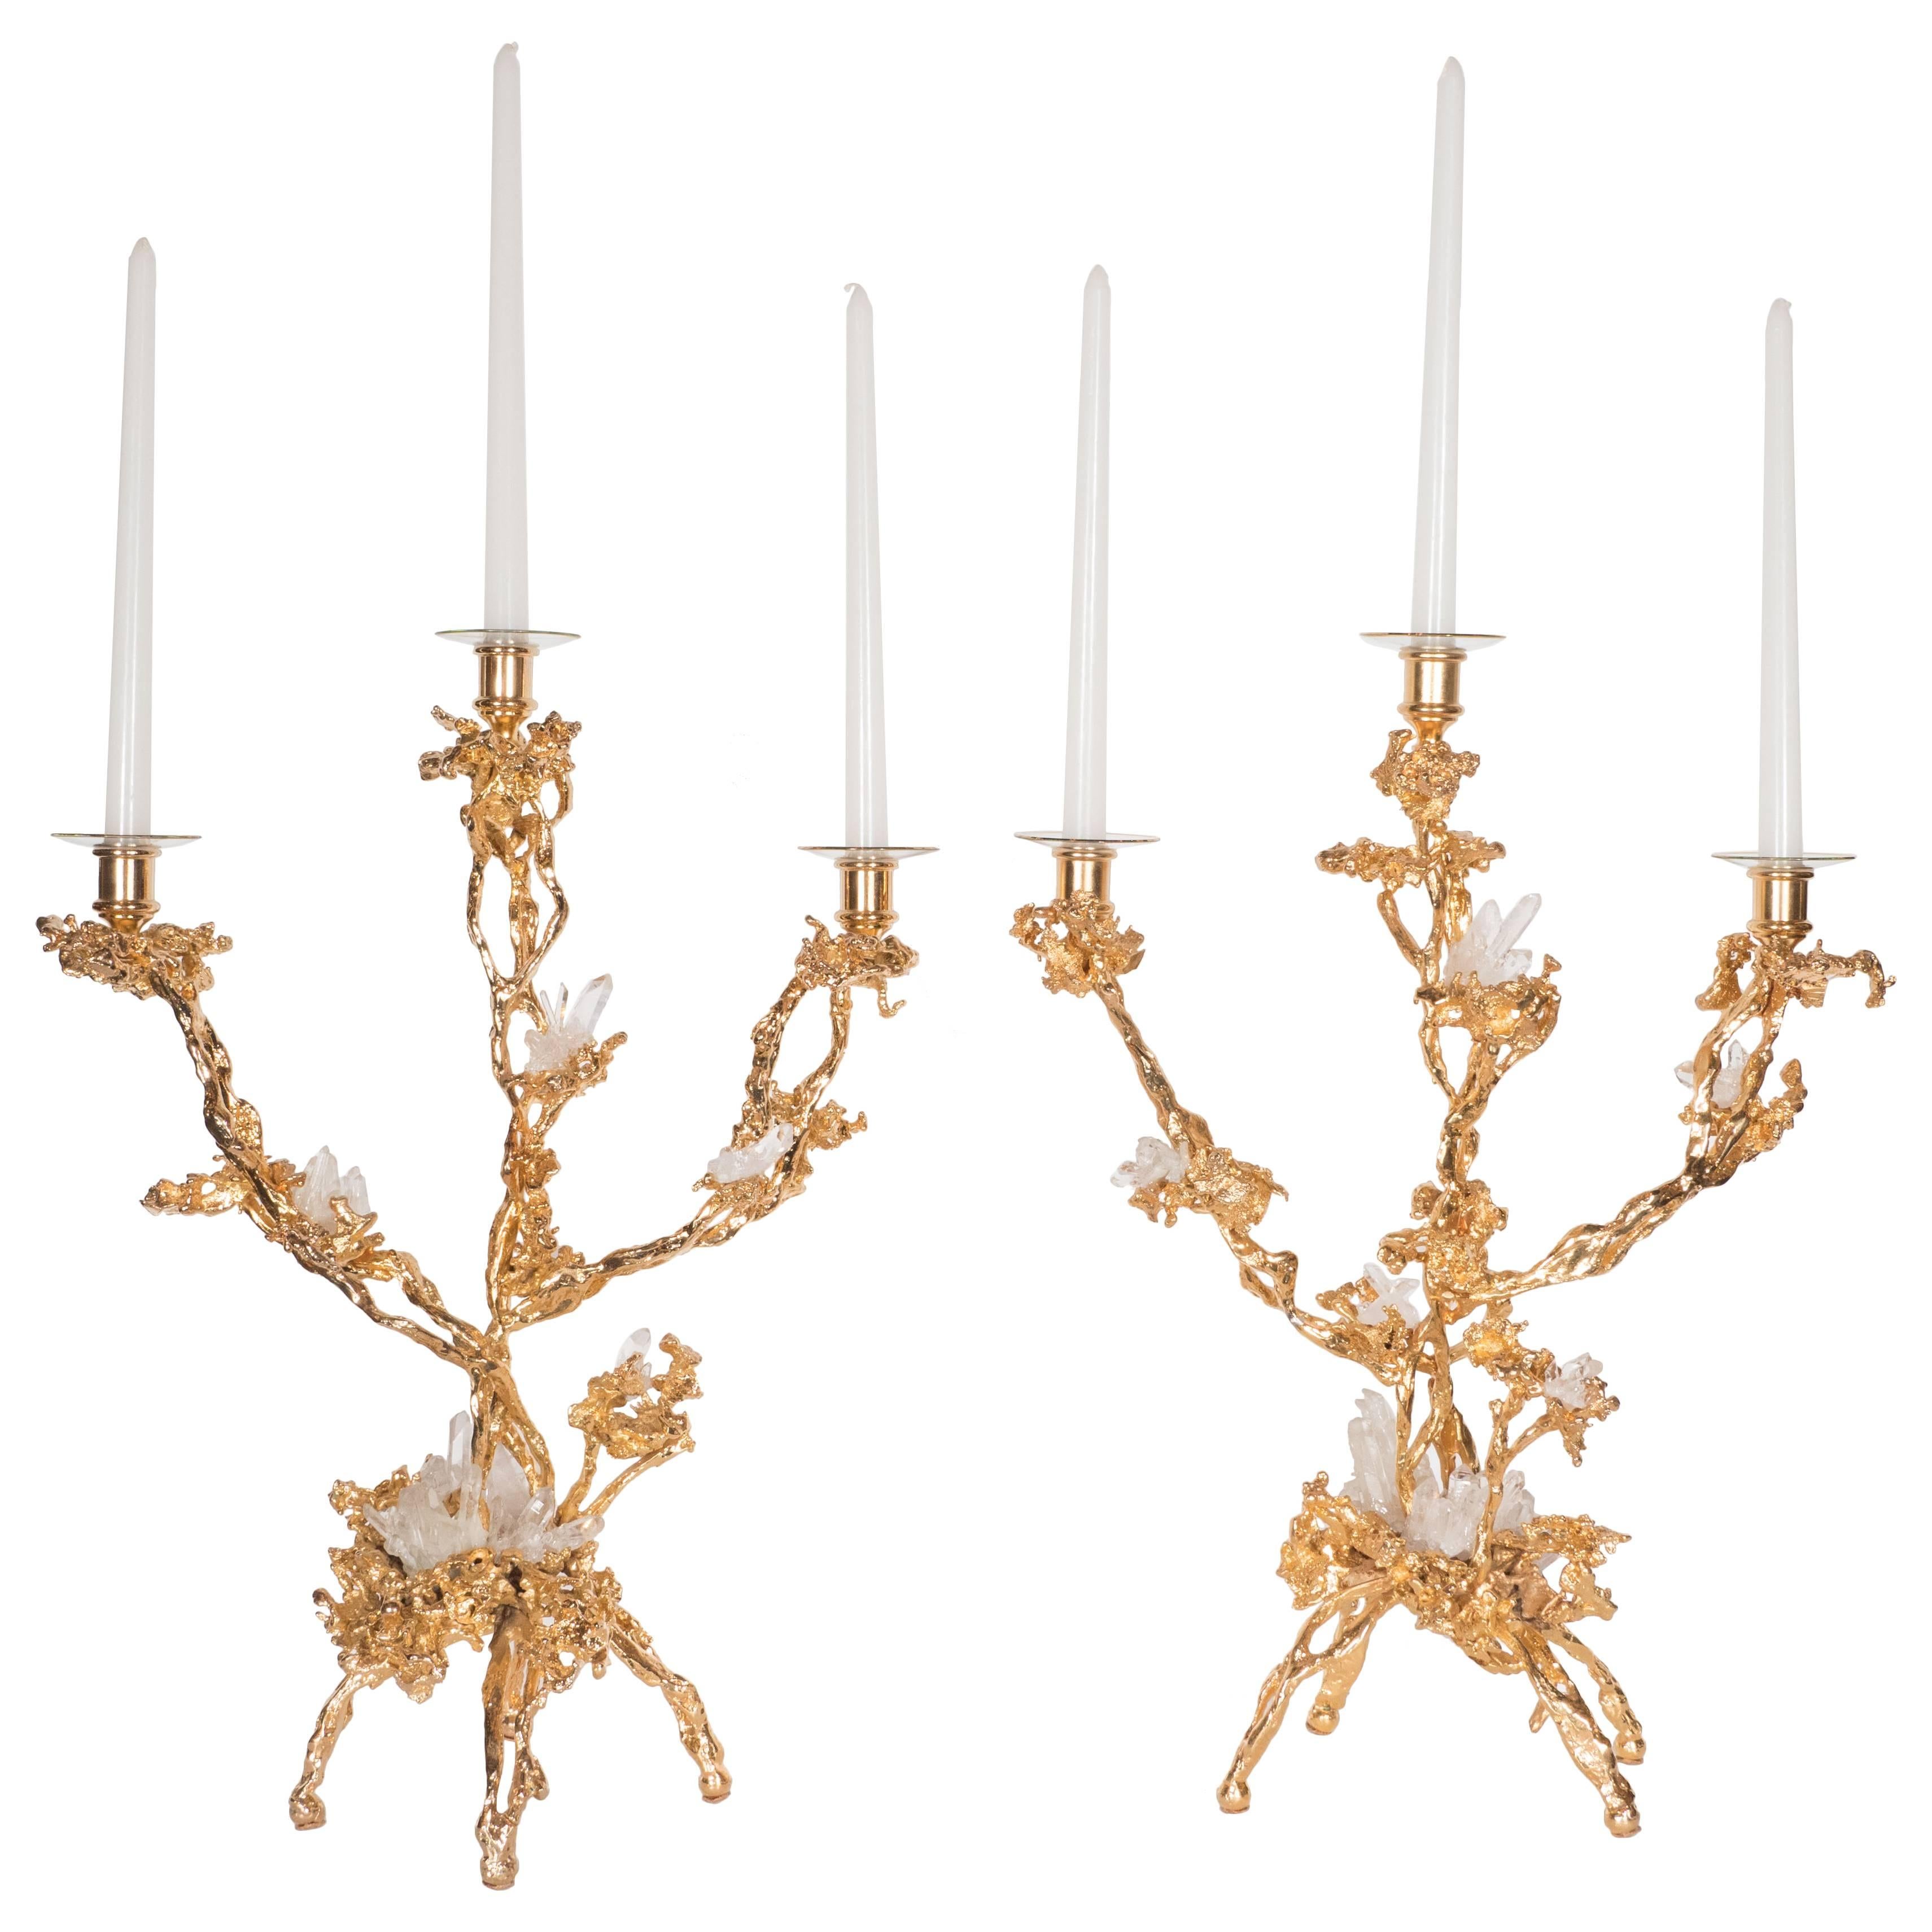 These stunning Mid-Century Modern candlesticks were realized in France circa 1970 by the esteemed artisan Claude Victor Boeltz. They offer an exploded form sculpted, by hand, and cast in bronze, consisting of three arms and four feet feet,